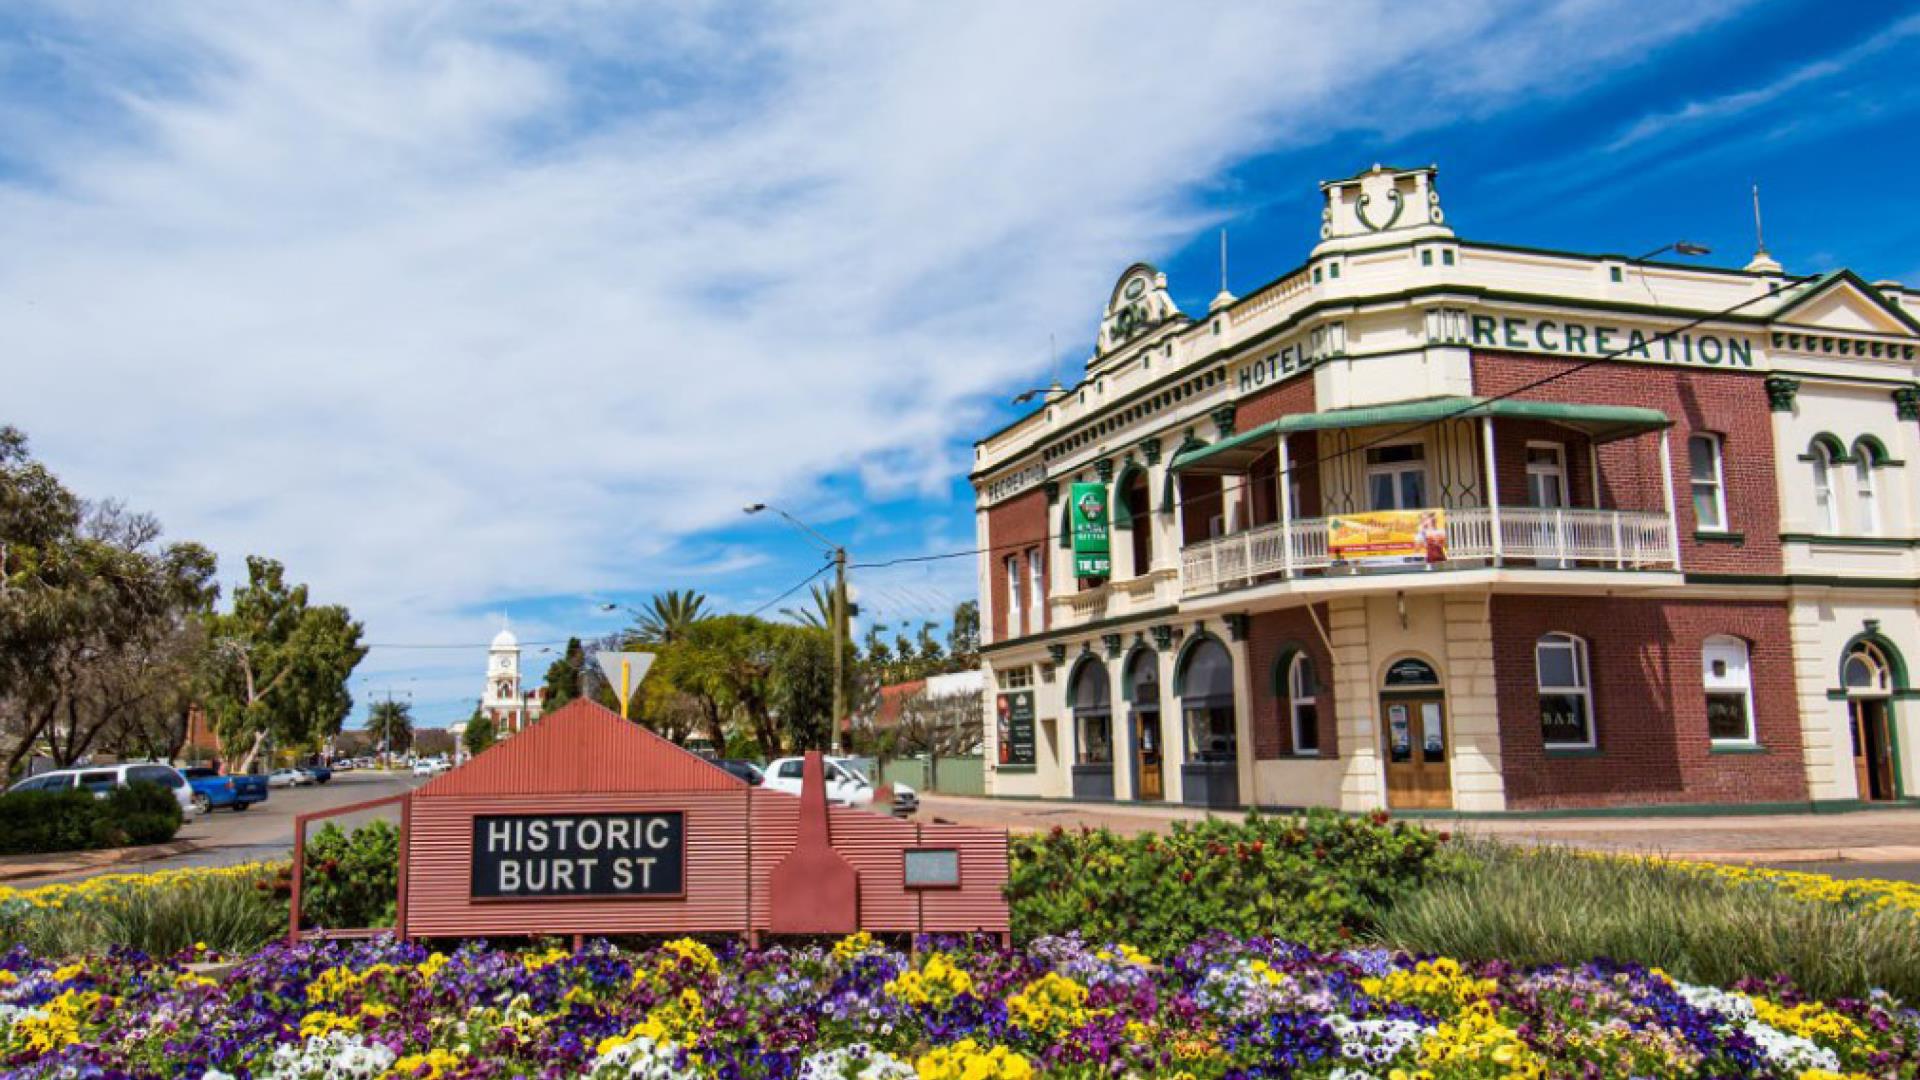 Have your say on the vision for the Boulder Tourism Precinct